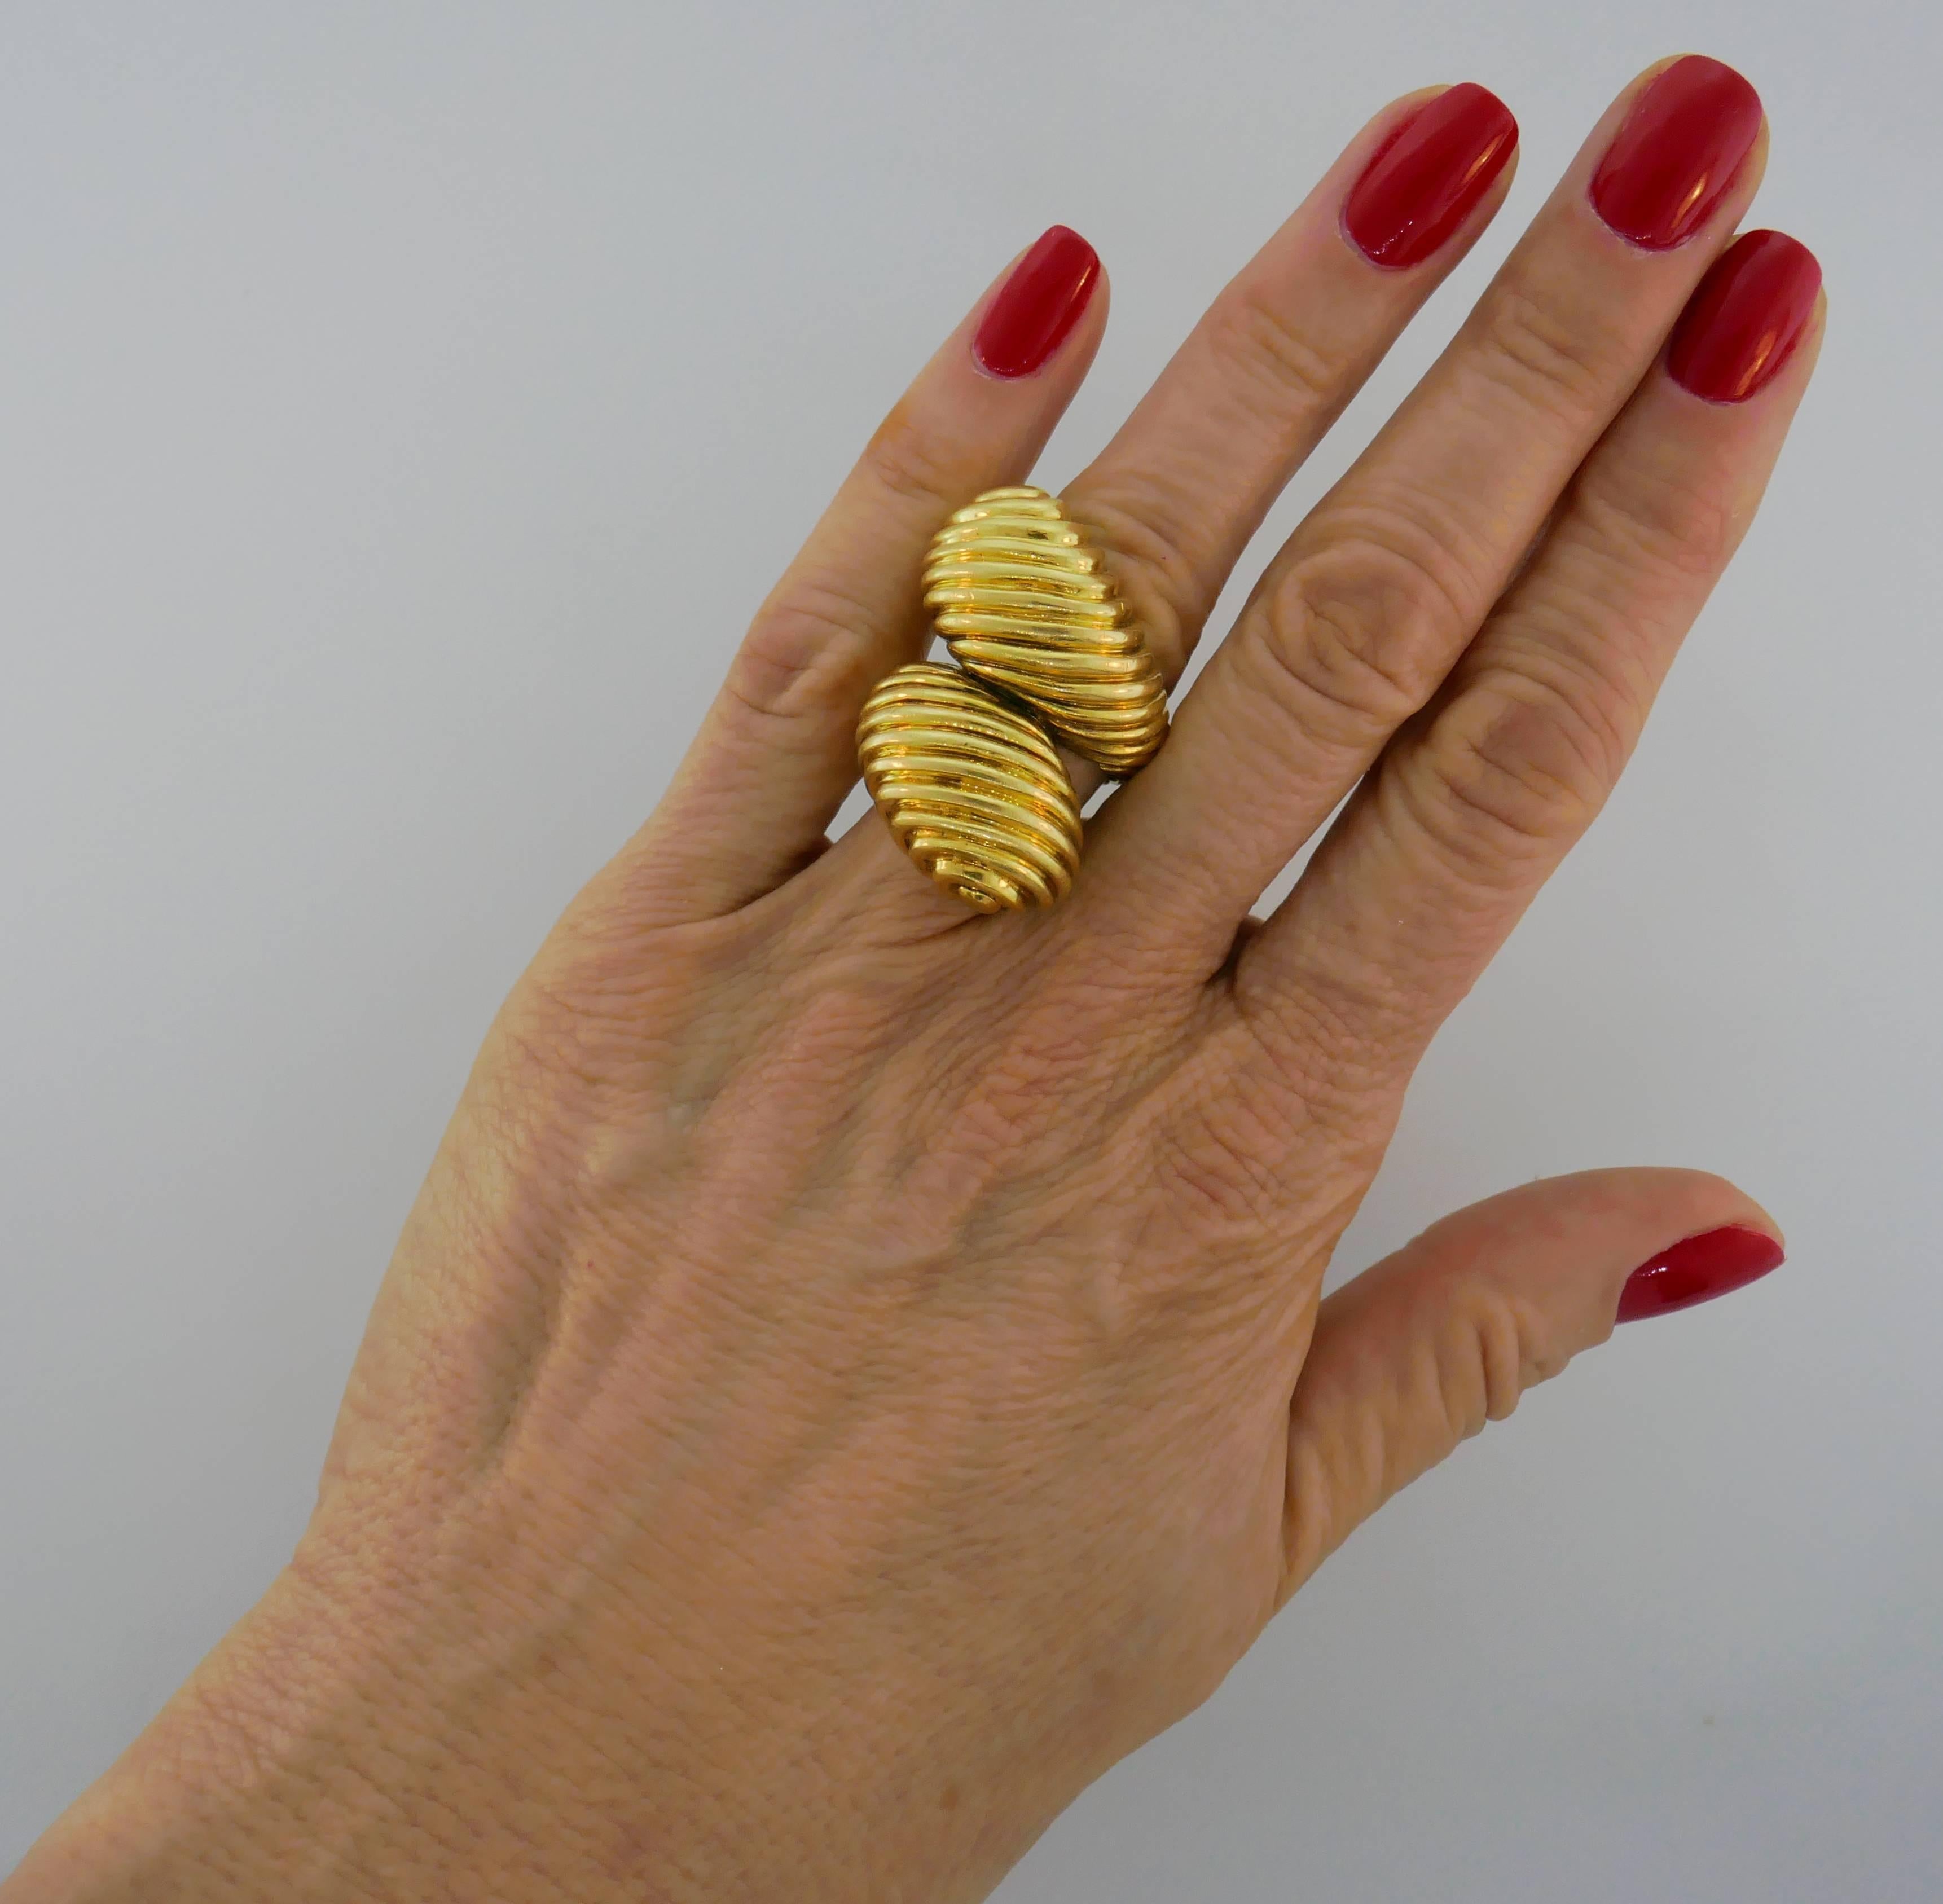 Bold cocktail ring created by David Webb in the 1970s. It is made of 18 karat yellow gold and designed as a stylized snake. Sharp, chic, prominent and wearable, the ring is a great addition to your jewelry collection.
The ring is size 5.5-6. It is